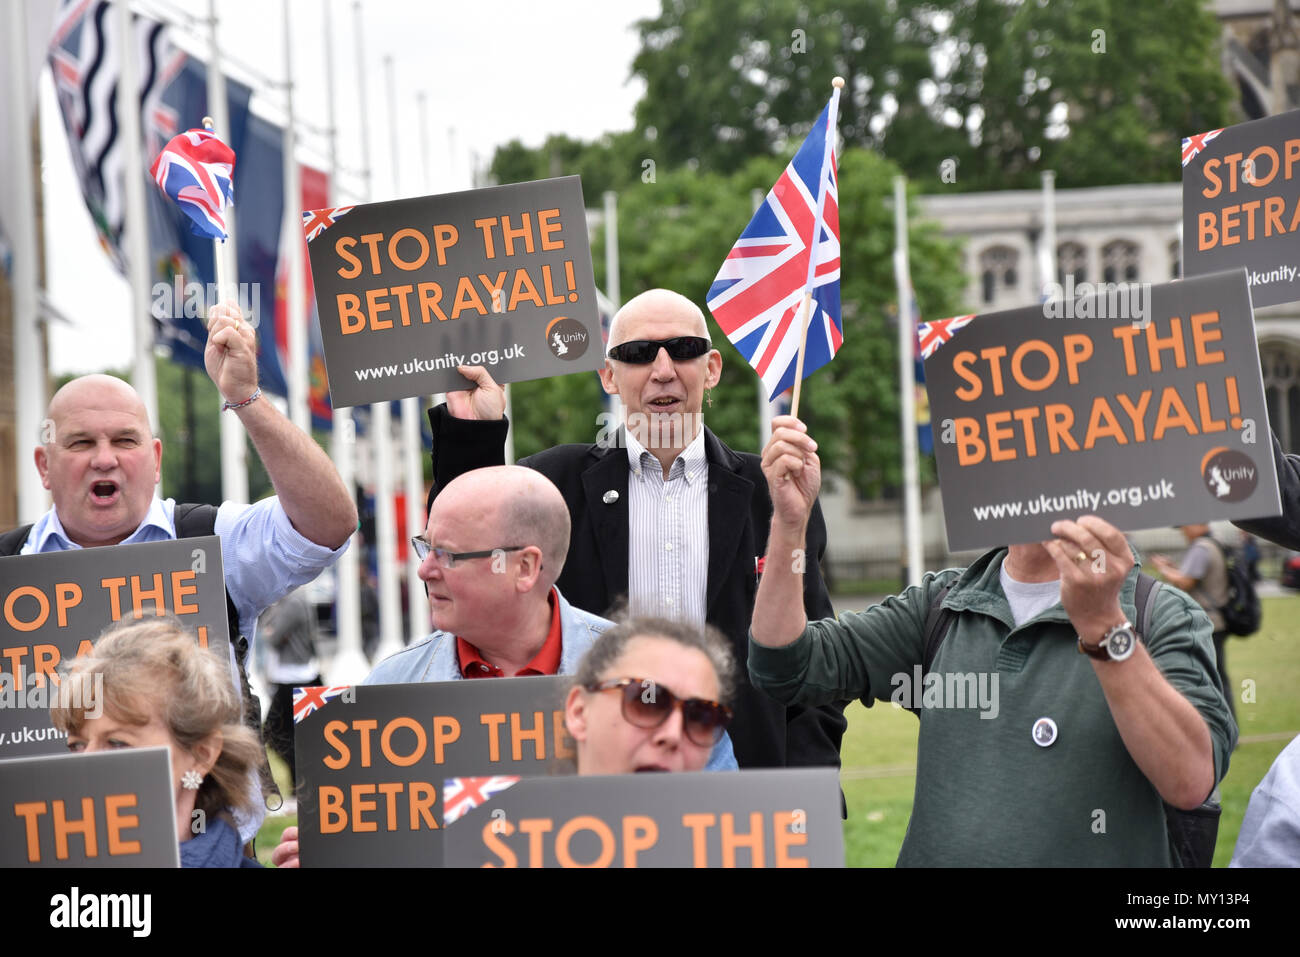 Westminster, London, UK. 5th June 2018. UK Unity a pro-Brexit organisation demands that the UK leave the EU immediately, demonstrating outside Downing Street  and Parliament. Credit: Matthew Chattle/Alamy Live News Stock Photo